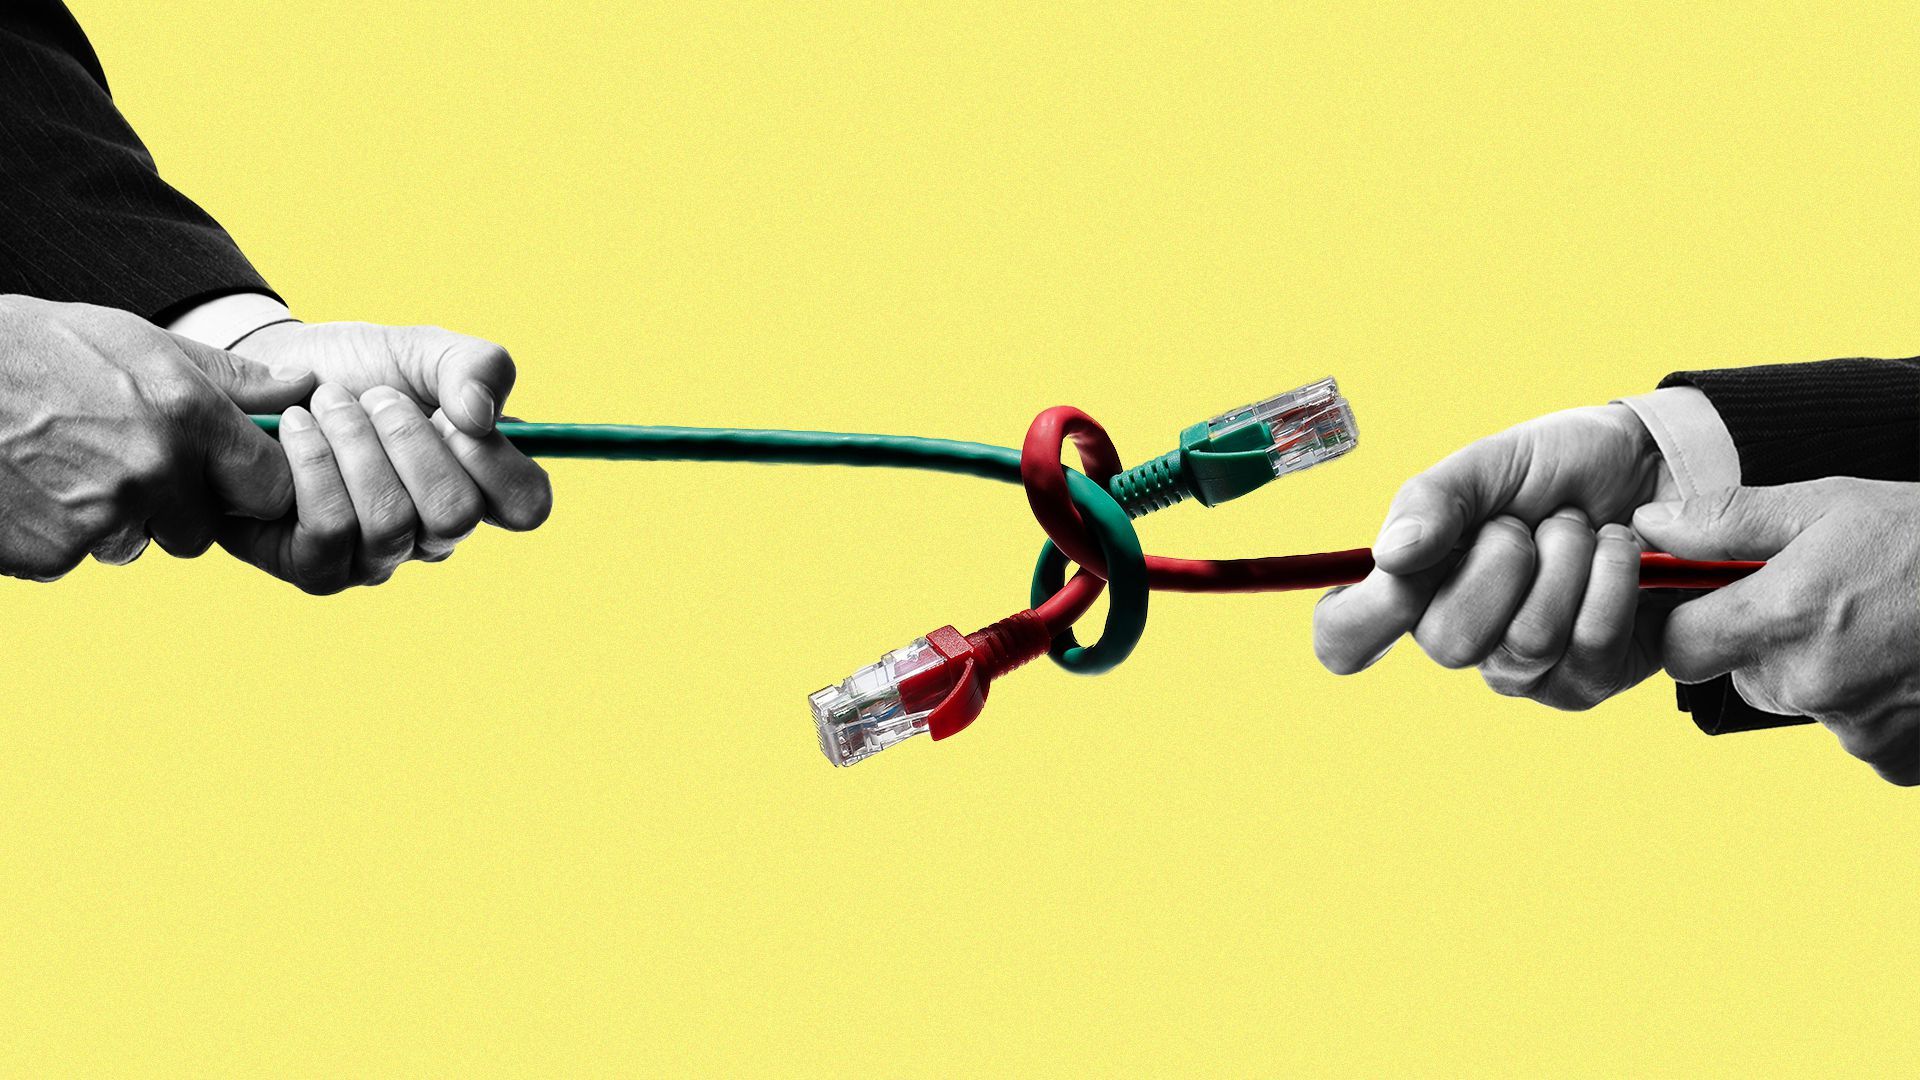 Illustration of two people playing tug-of-war with ethernet cables.